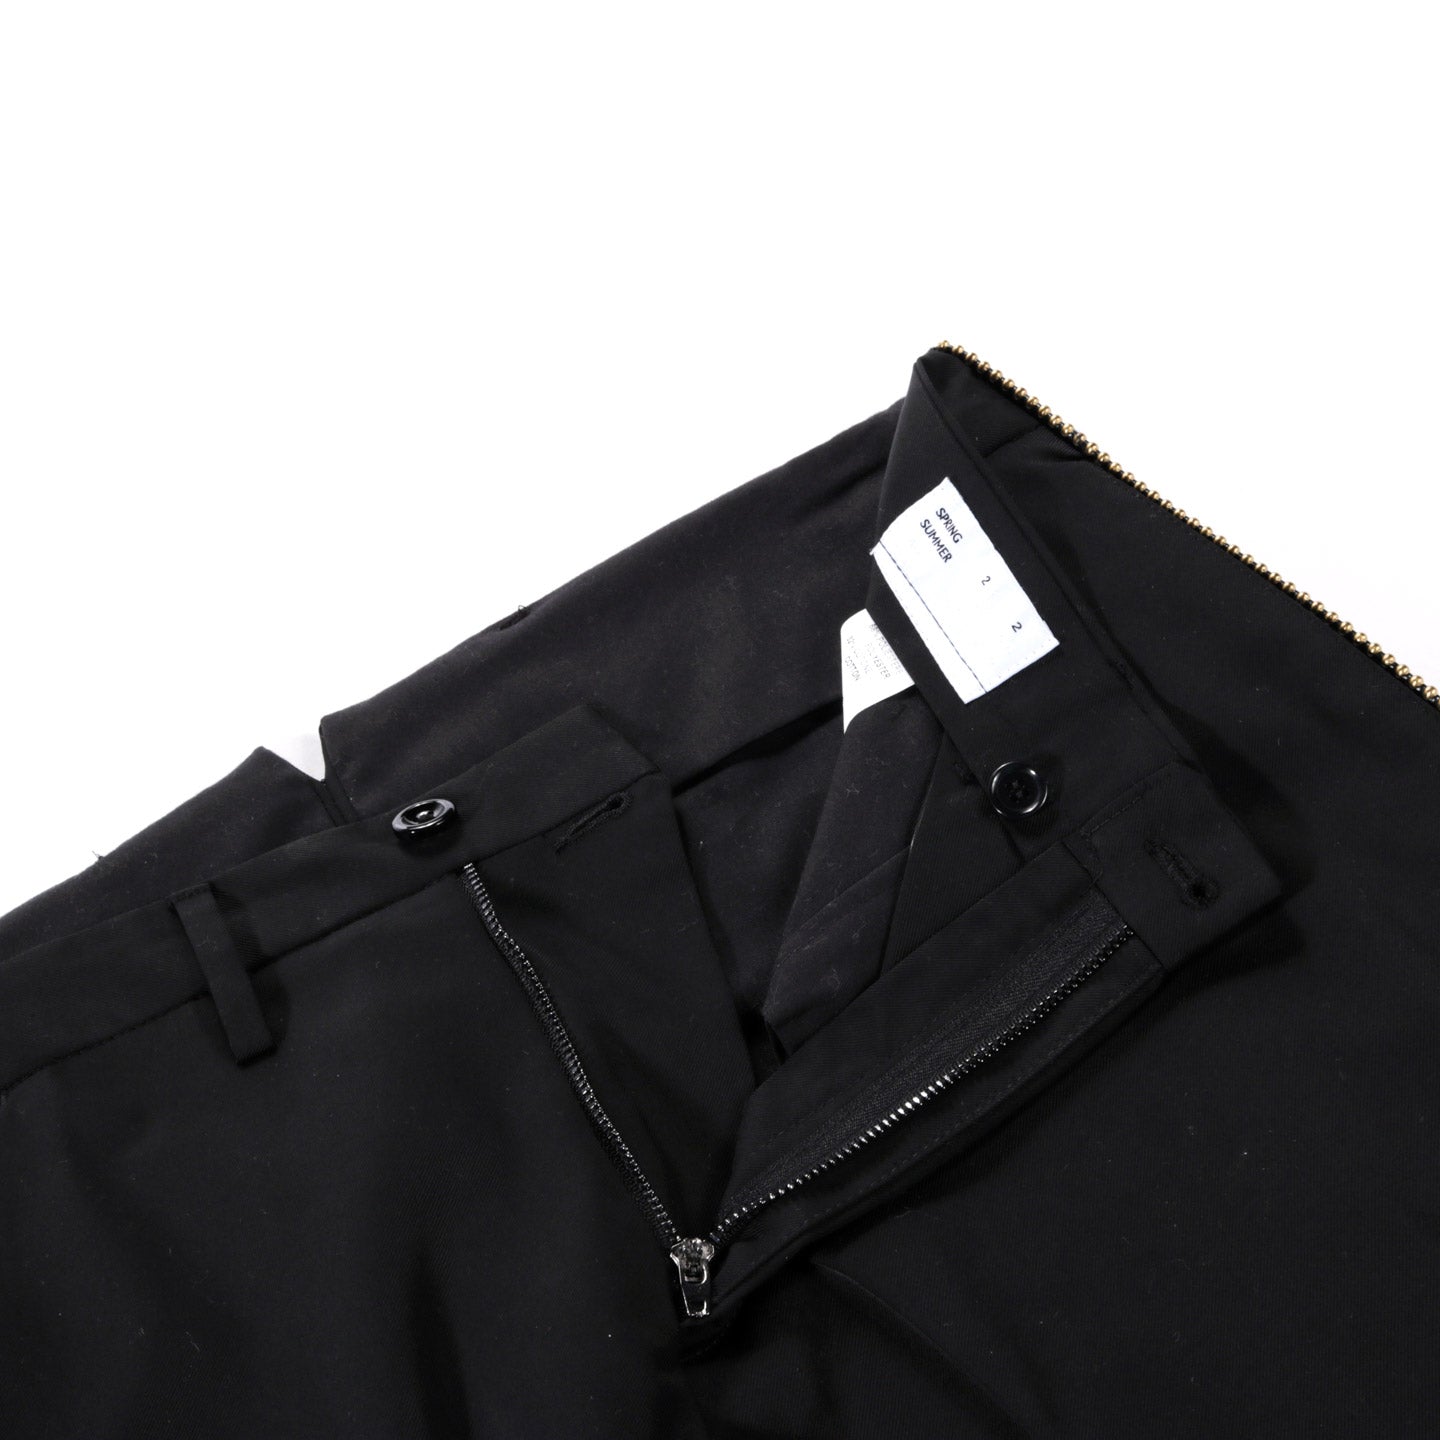 4SDESIGNS H.SARTORIAL PANT BLACK PC TWILL LEATHER STUD PIPING